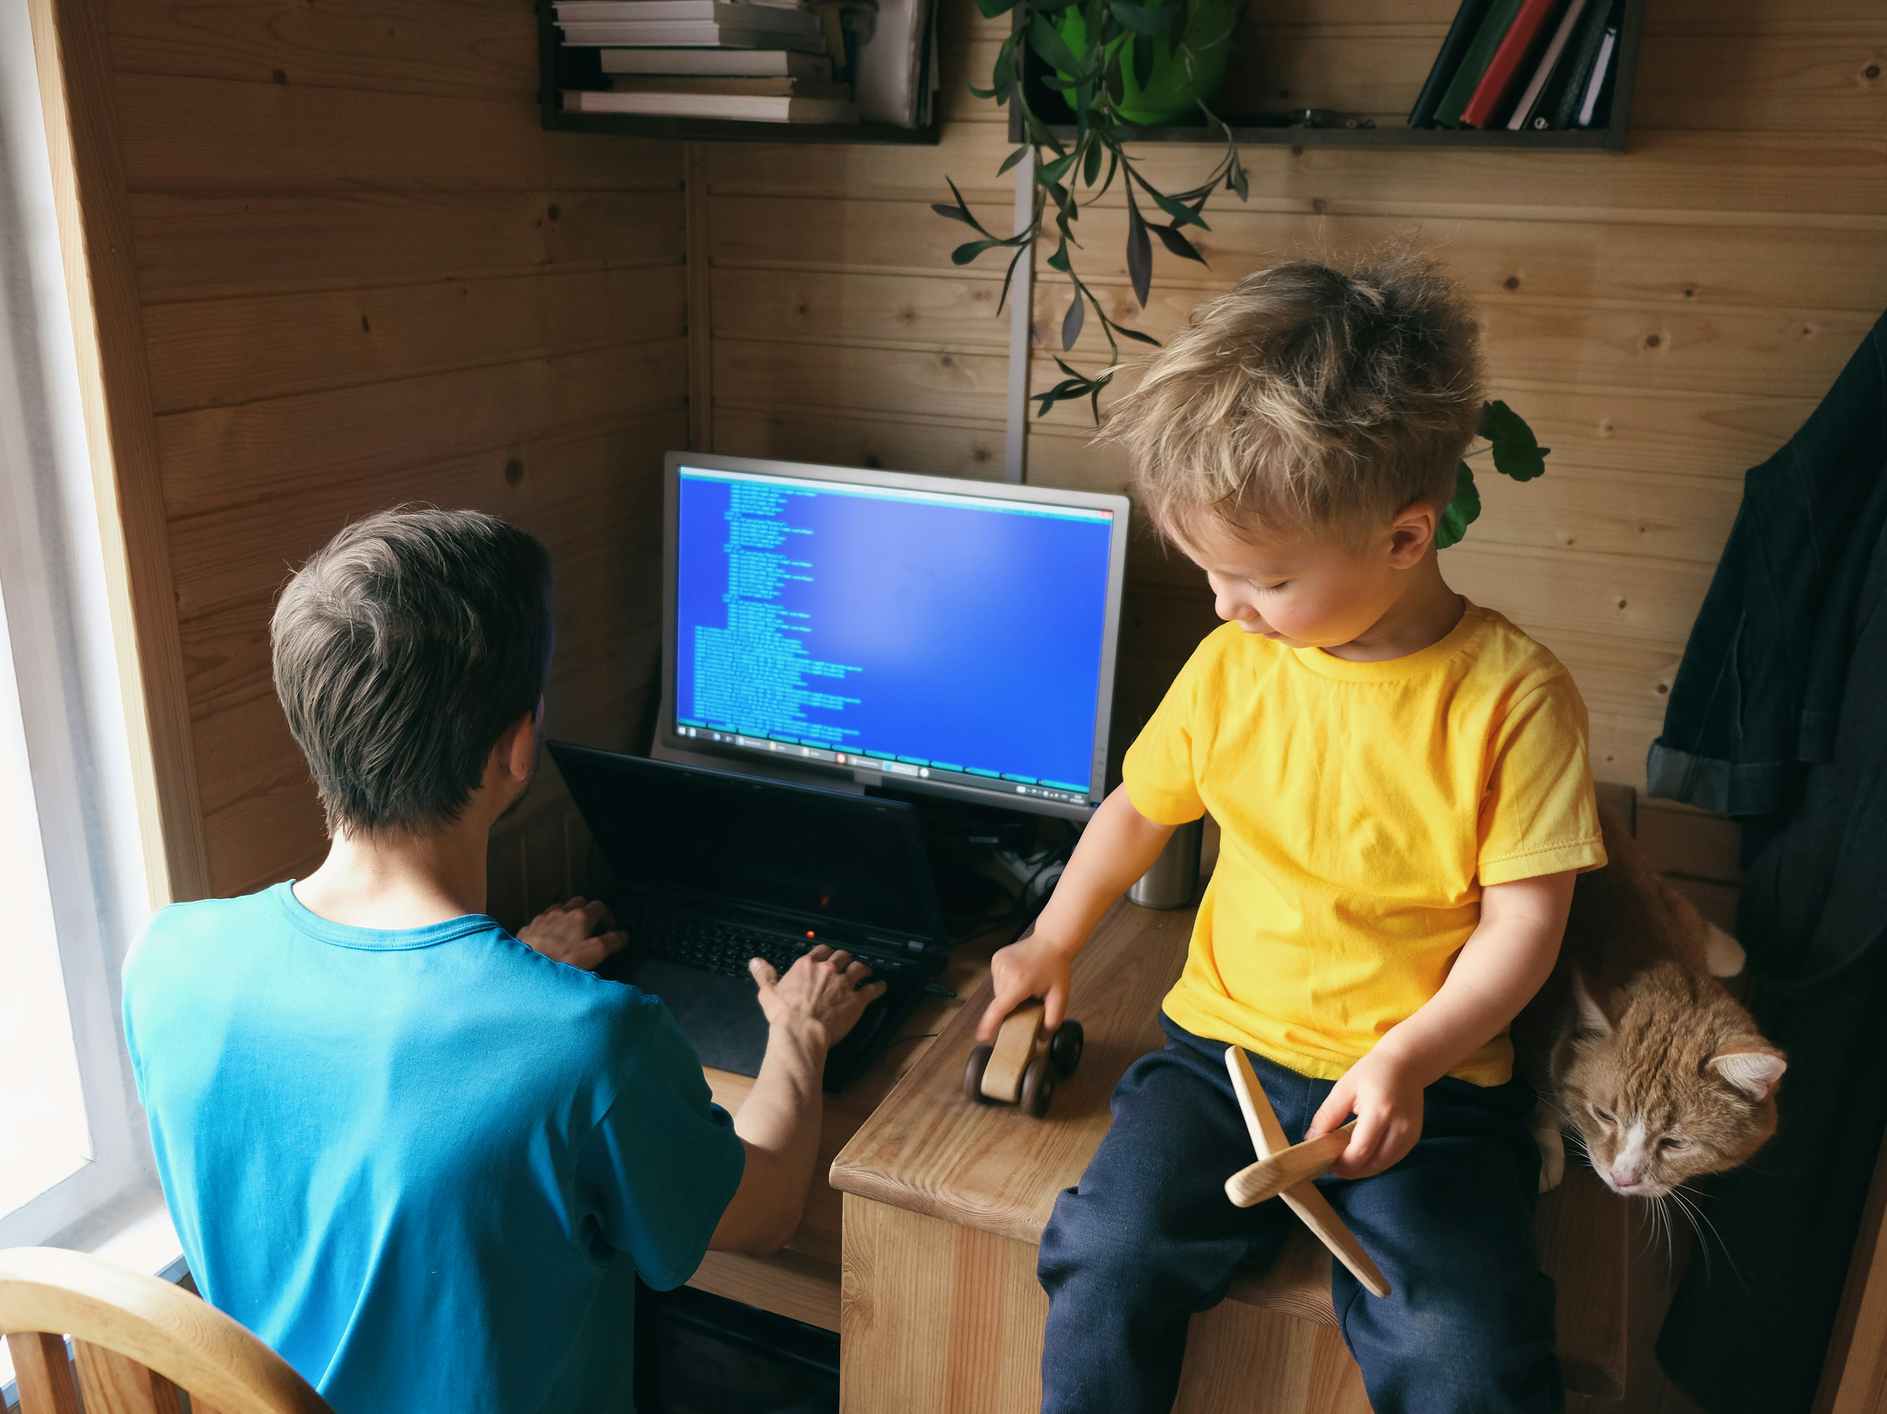 dad works on computer with small boy watching